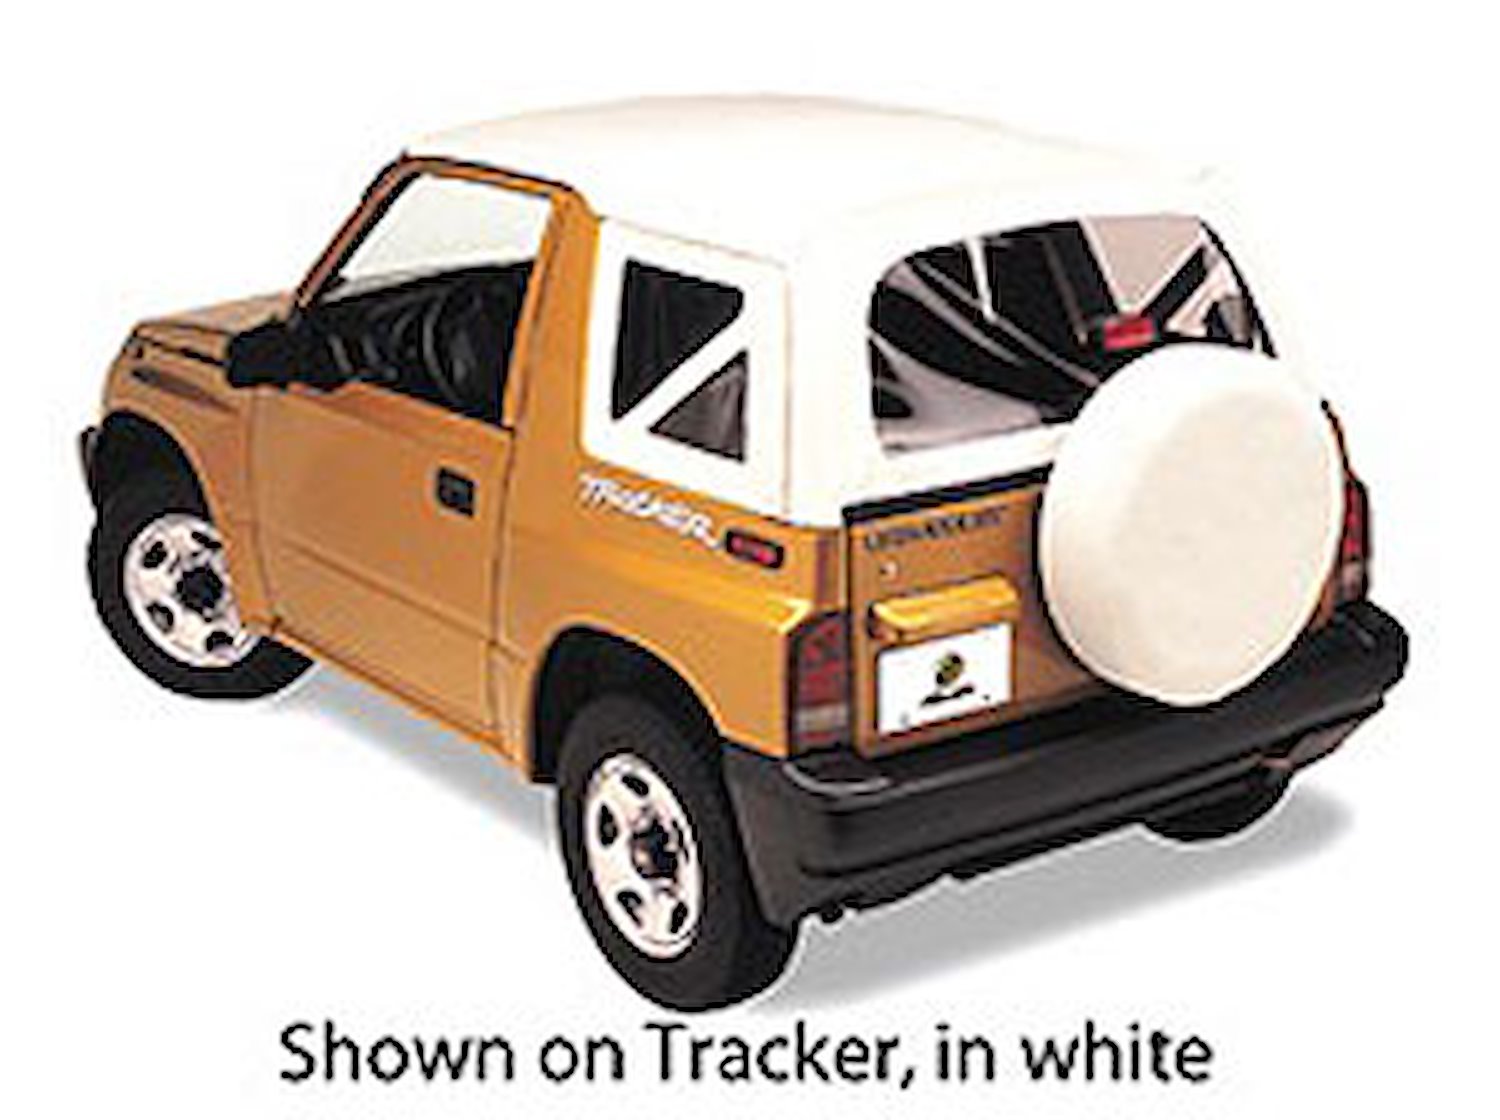 Replace-A-Top, White Denim, Clear Windows, No Door Skins Included,